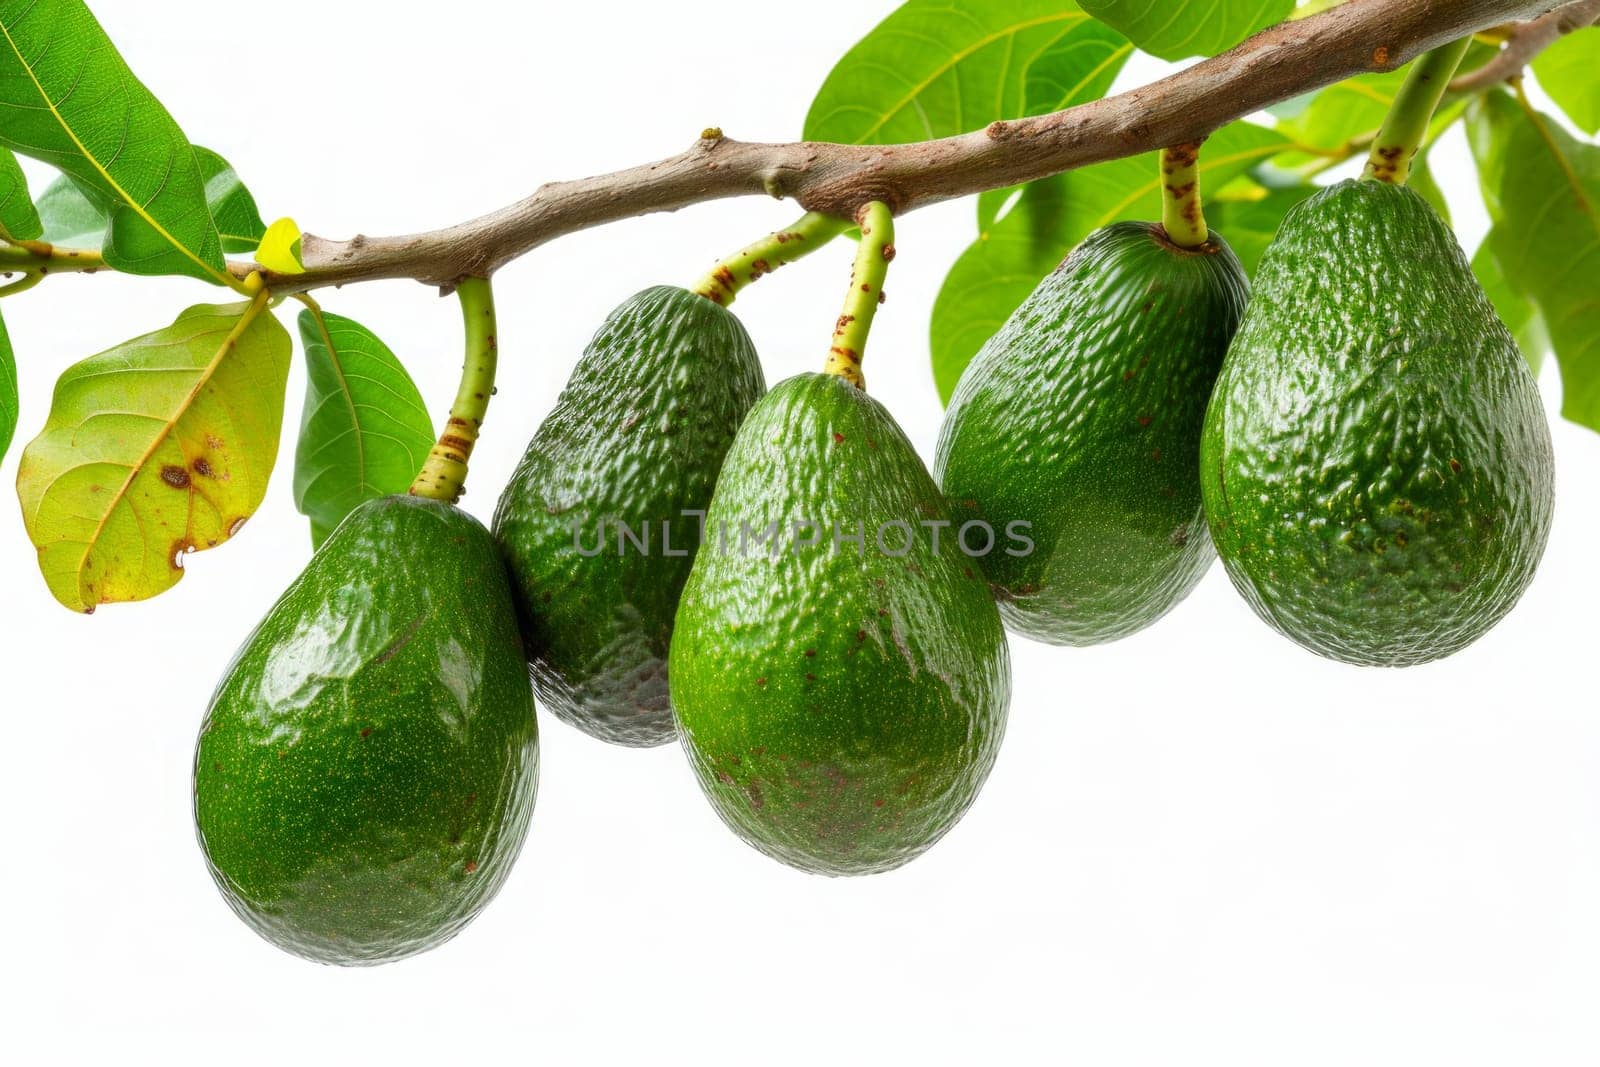 avocados in the tree branch isolated on white background, also known as alligator pear or butter fruit.